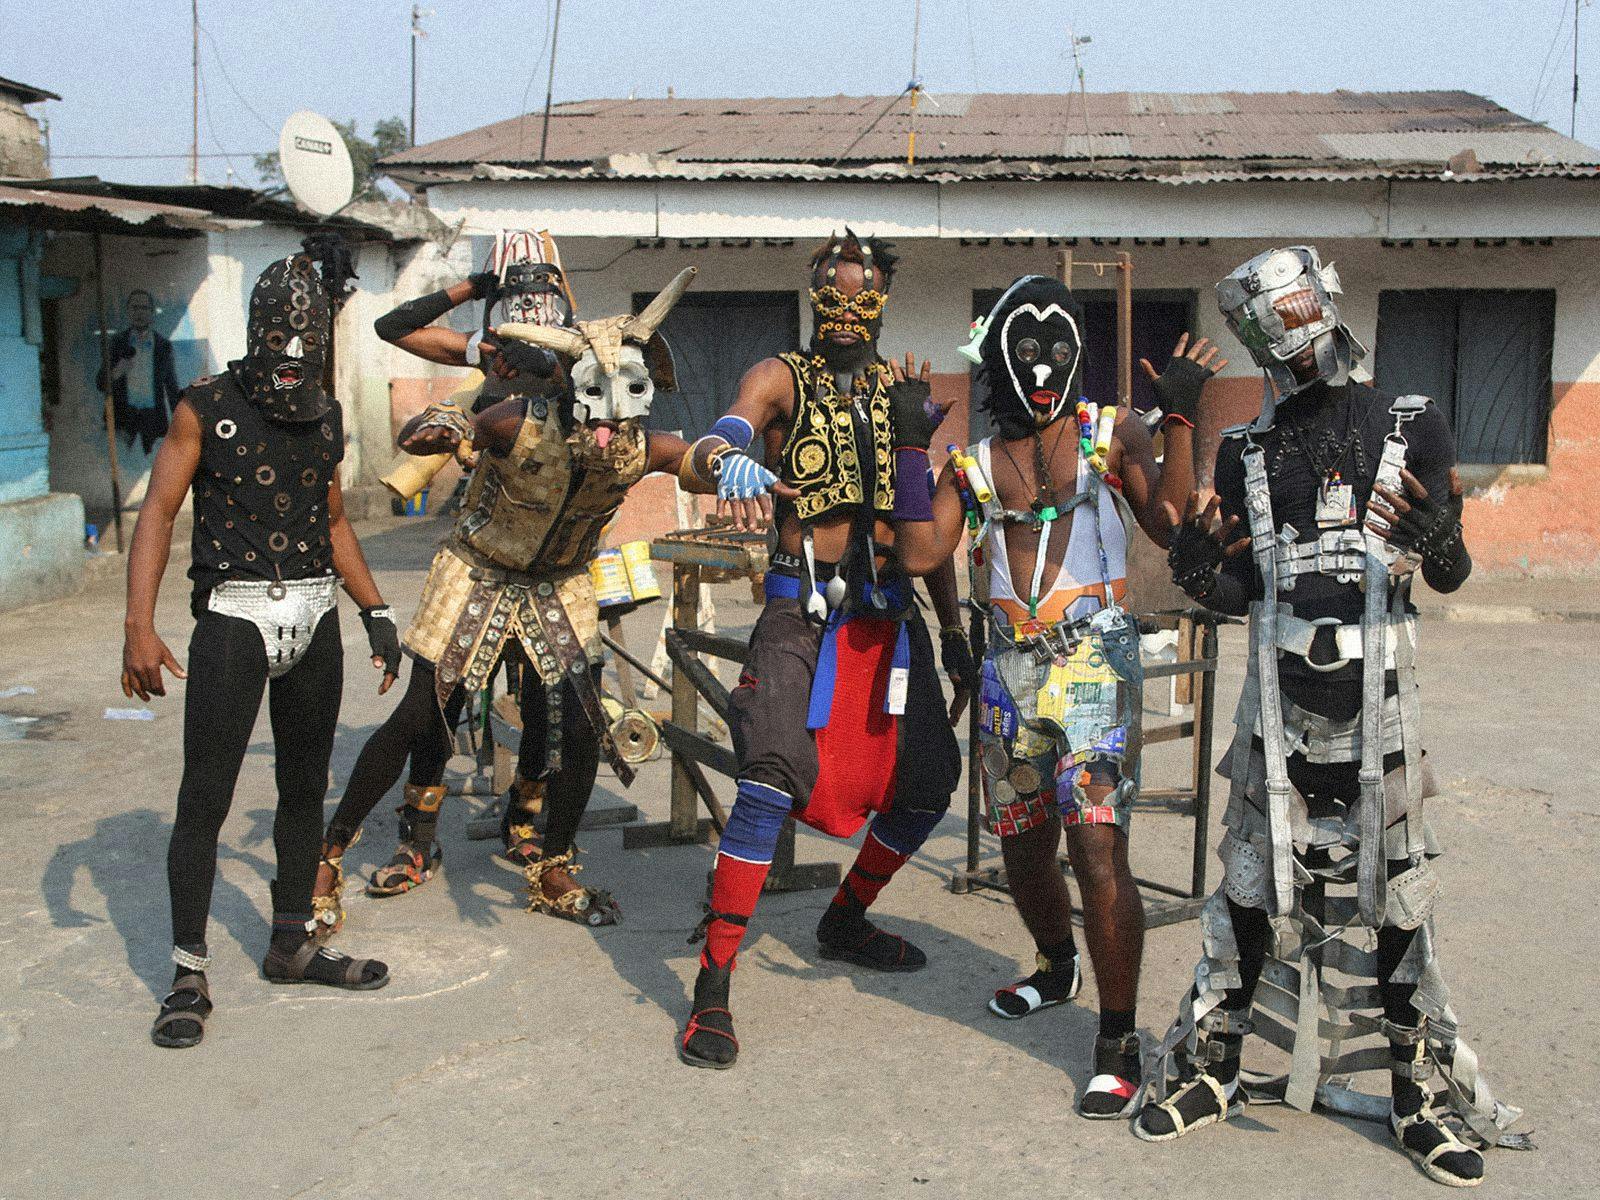 The 6 Members of Fulu Miziki pose wearing home-made costumes and masks.